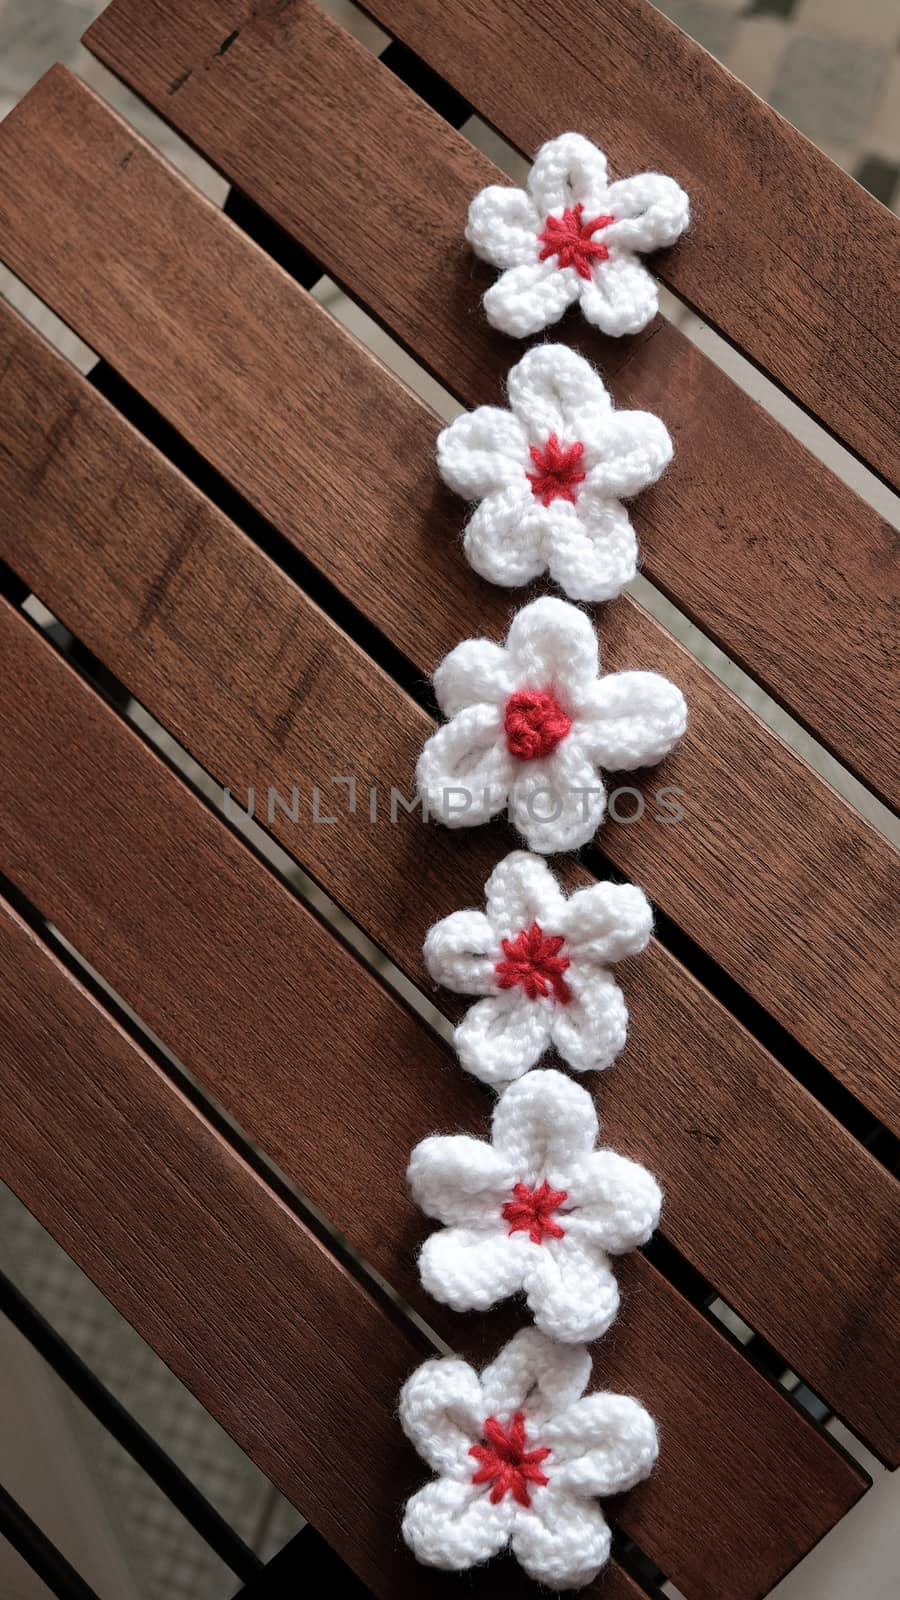 knit daisy flower on wood background by xuanhuongho